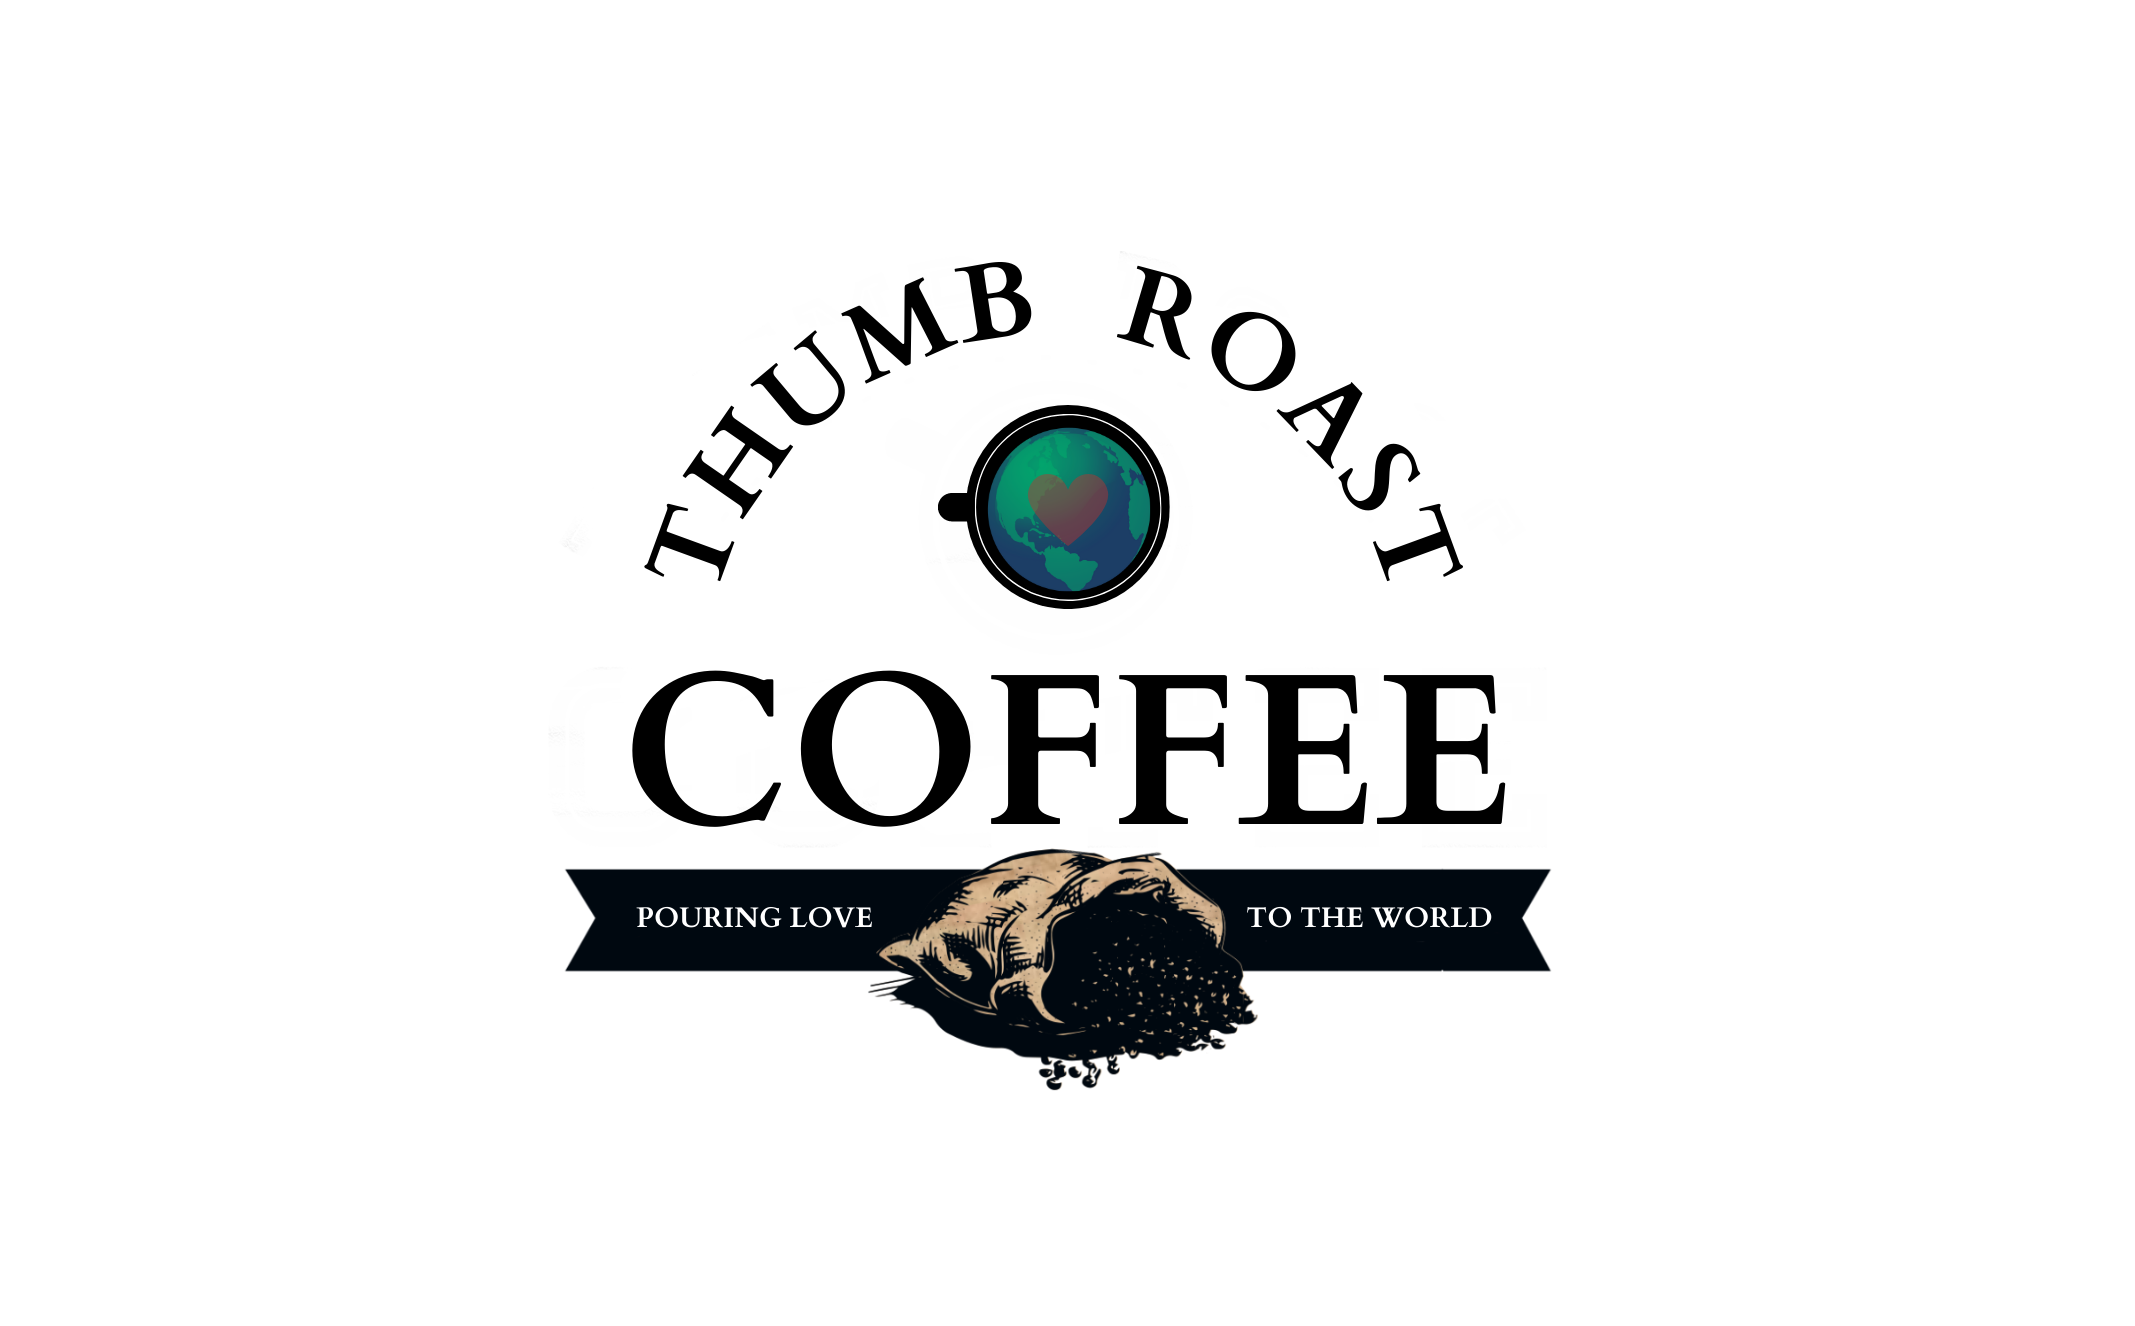 Artisan, Clean, and Locally Roasted - Thumb Roast Coffee